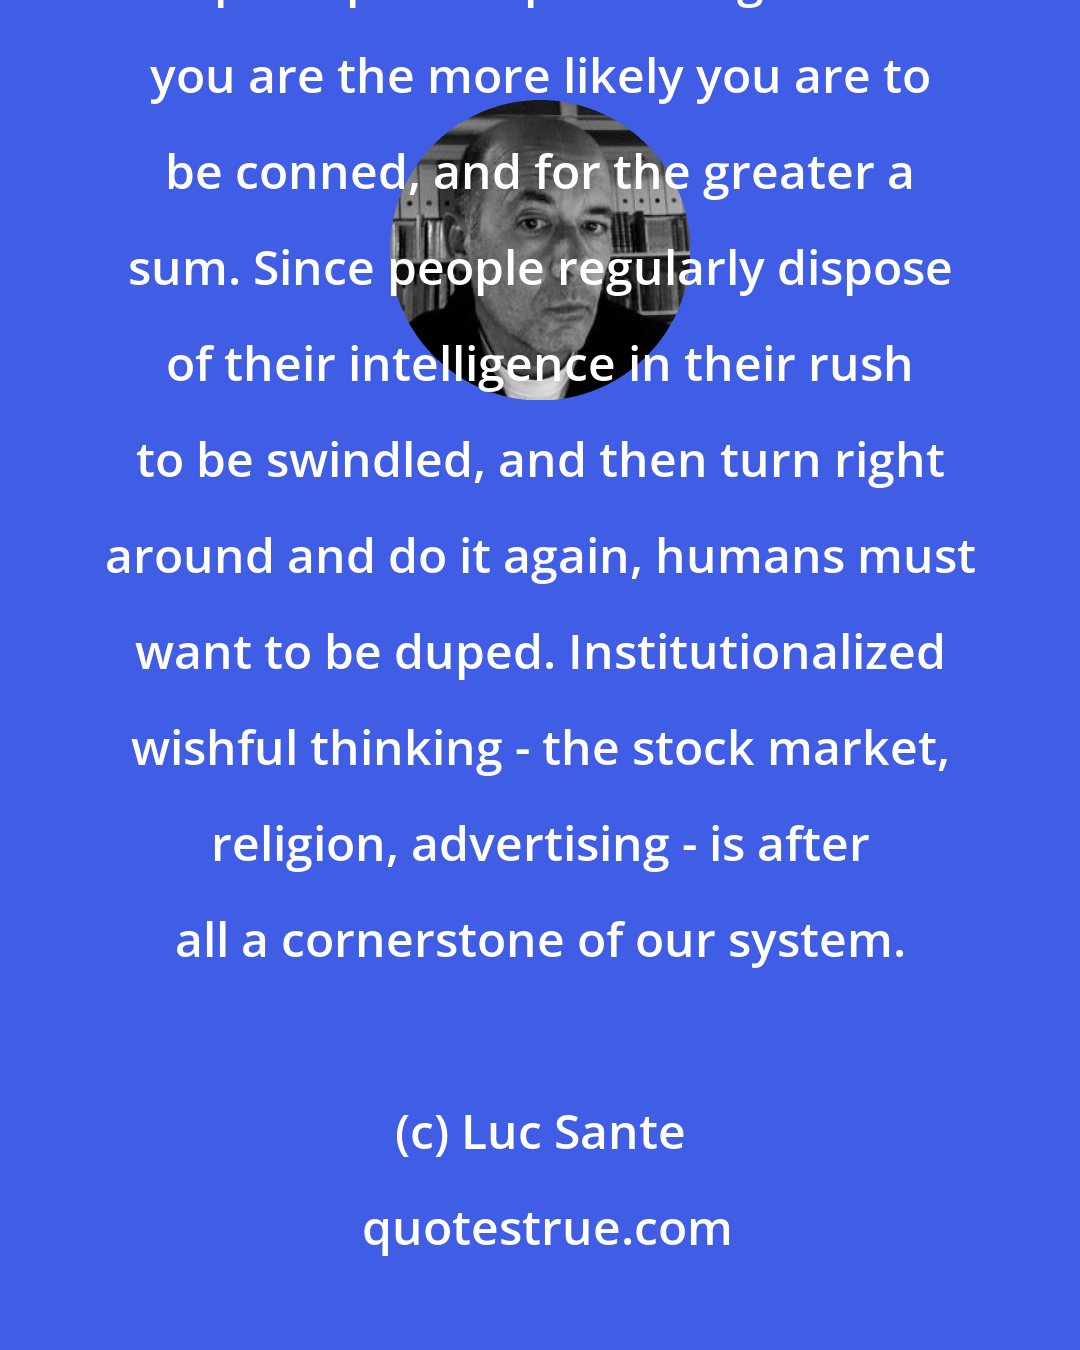 Luc Sante: The con is a kind of jiu-jitsu that turns the sucker's own greed into its principal weapon. The greedier you are the more likely you are to be conned, and for the greater a sum. Since people regularly dispose of their intelligence in their rush to be swindled, and then turn right around and do it again, humans must want to be duped. Institutionalized wishful thinking - the stock market, religion, advertising - is after all a cornerstone of our system.